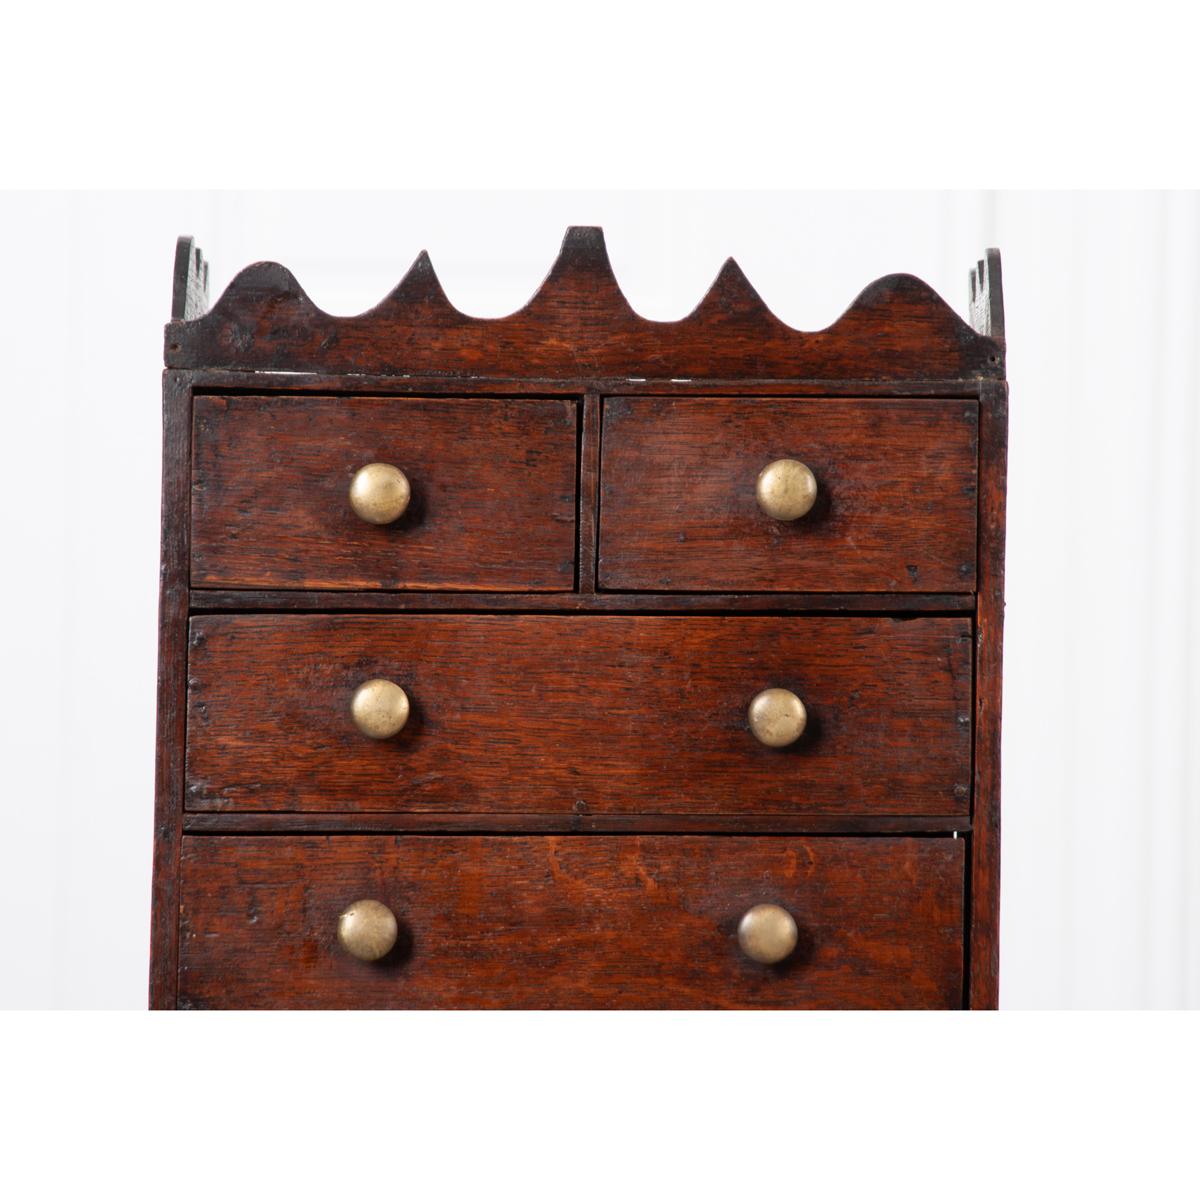 A lovely, English apprentice chest from the 18th century, circa 1780. This wonderful work is that of an apprentice that studied under a woodworker. In order to work for the woodworker, the apprentice would have to build a box, utilizing his best